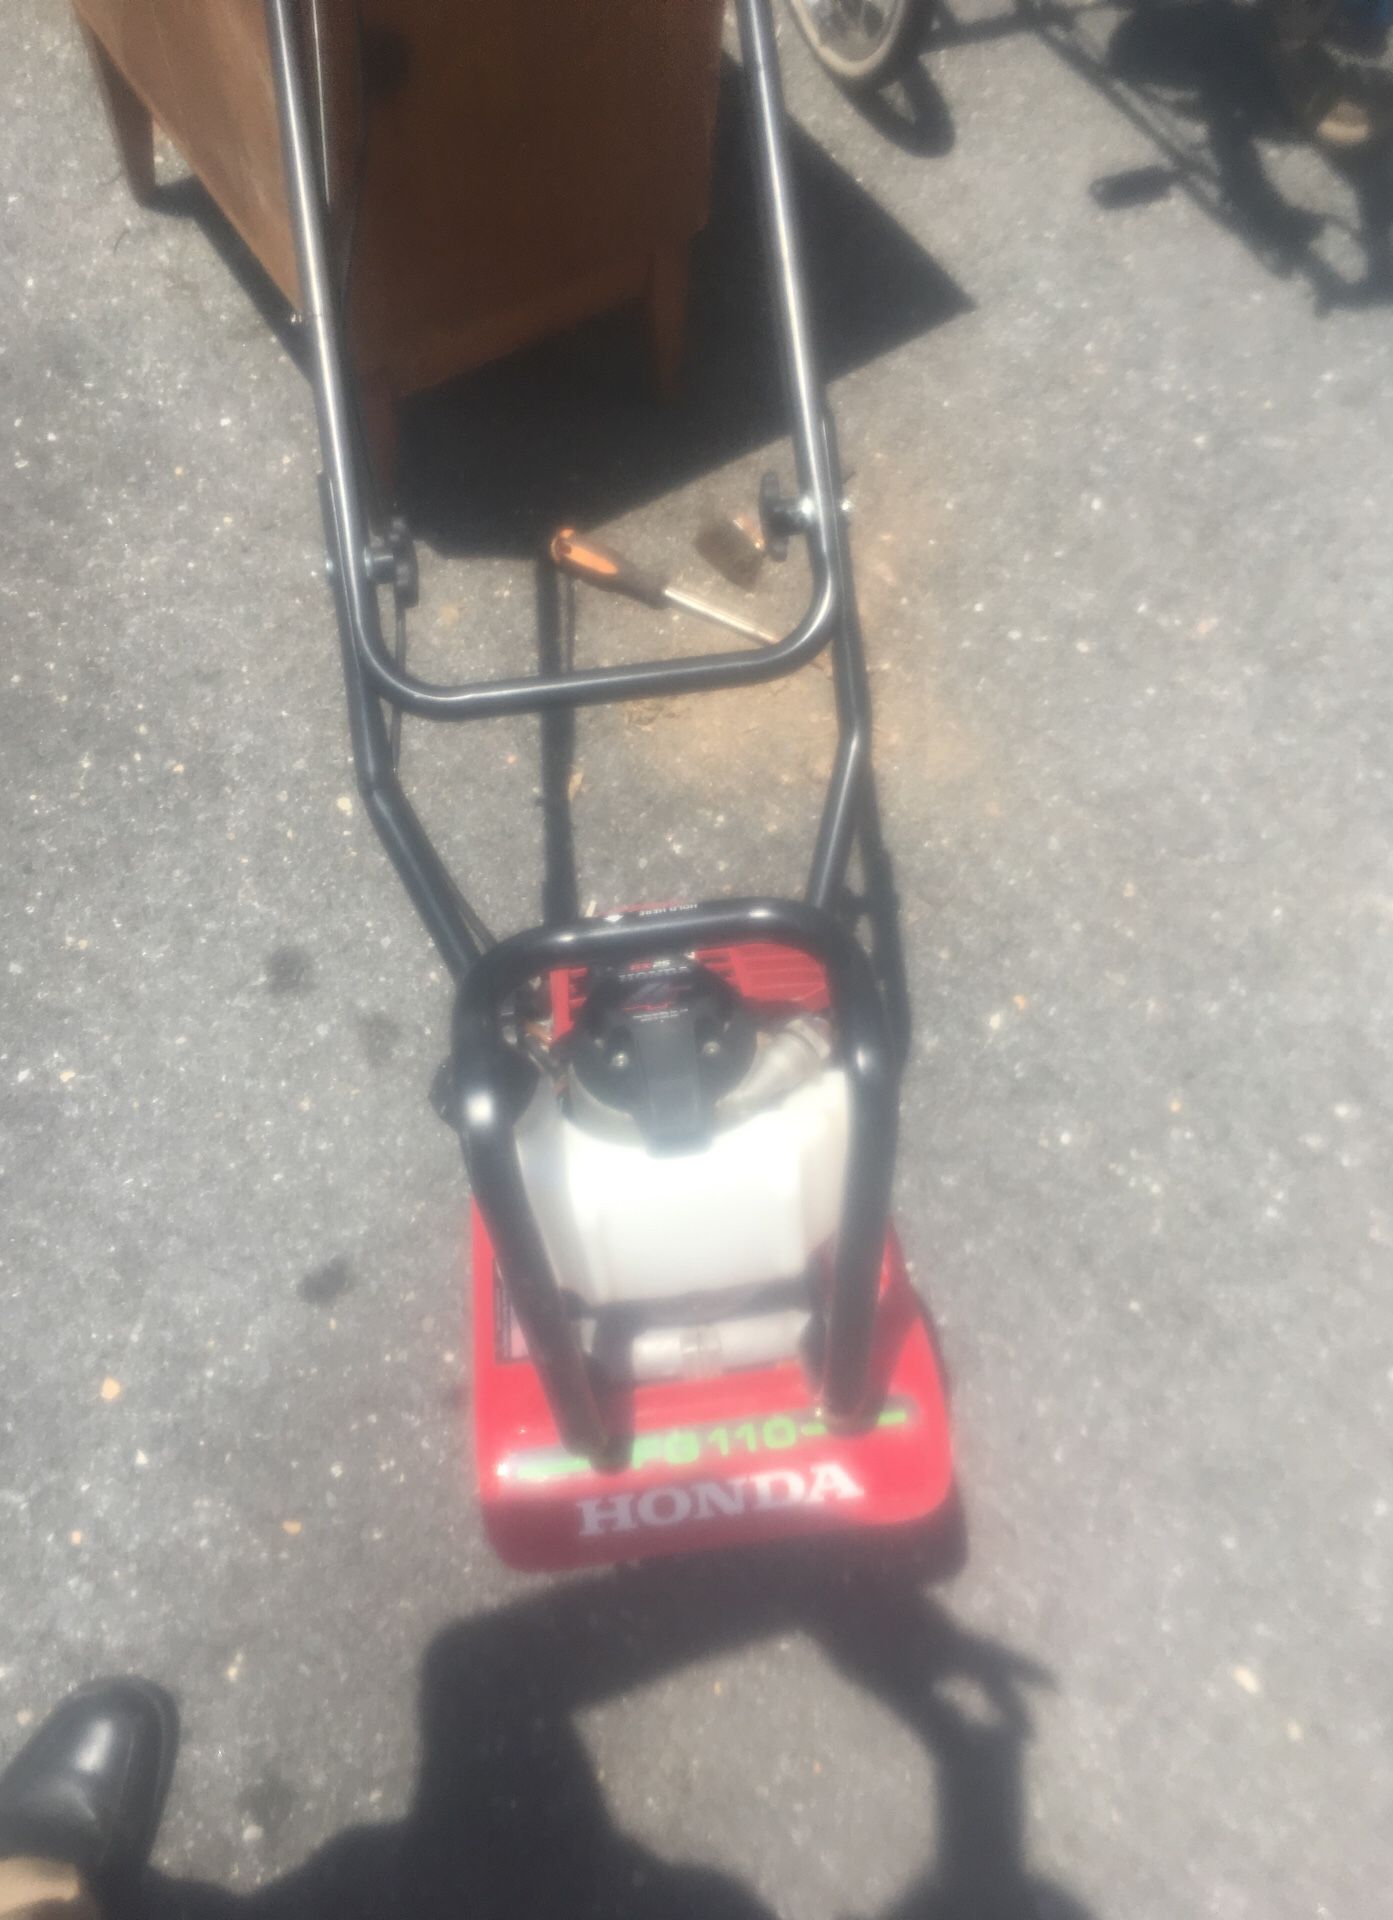 Honda tiller, used only twice, almost brand new